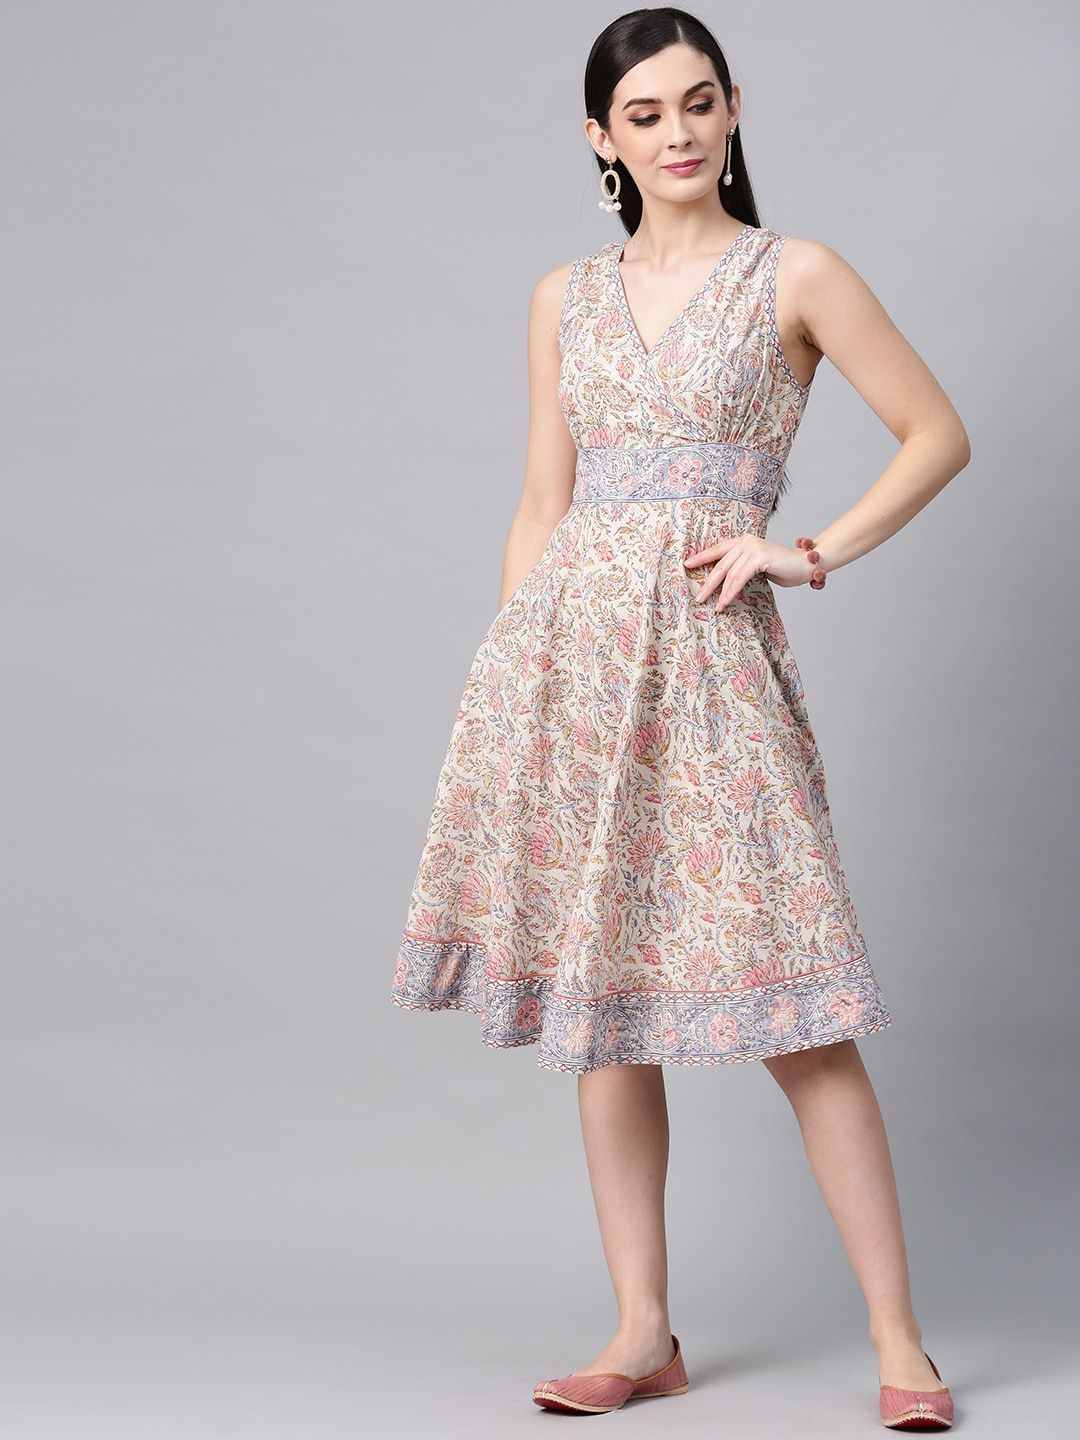 Women's  Off-White & Pink Printed Fit and Flare Dress - AKS